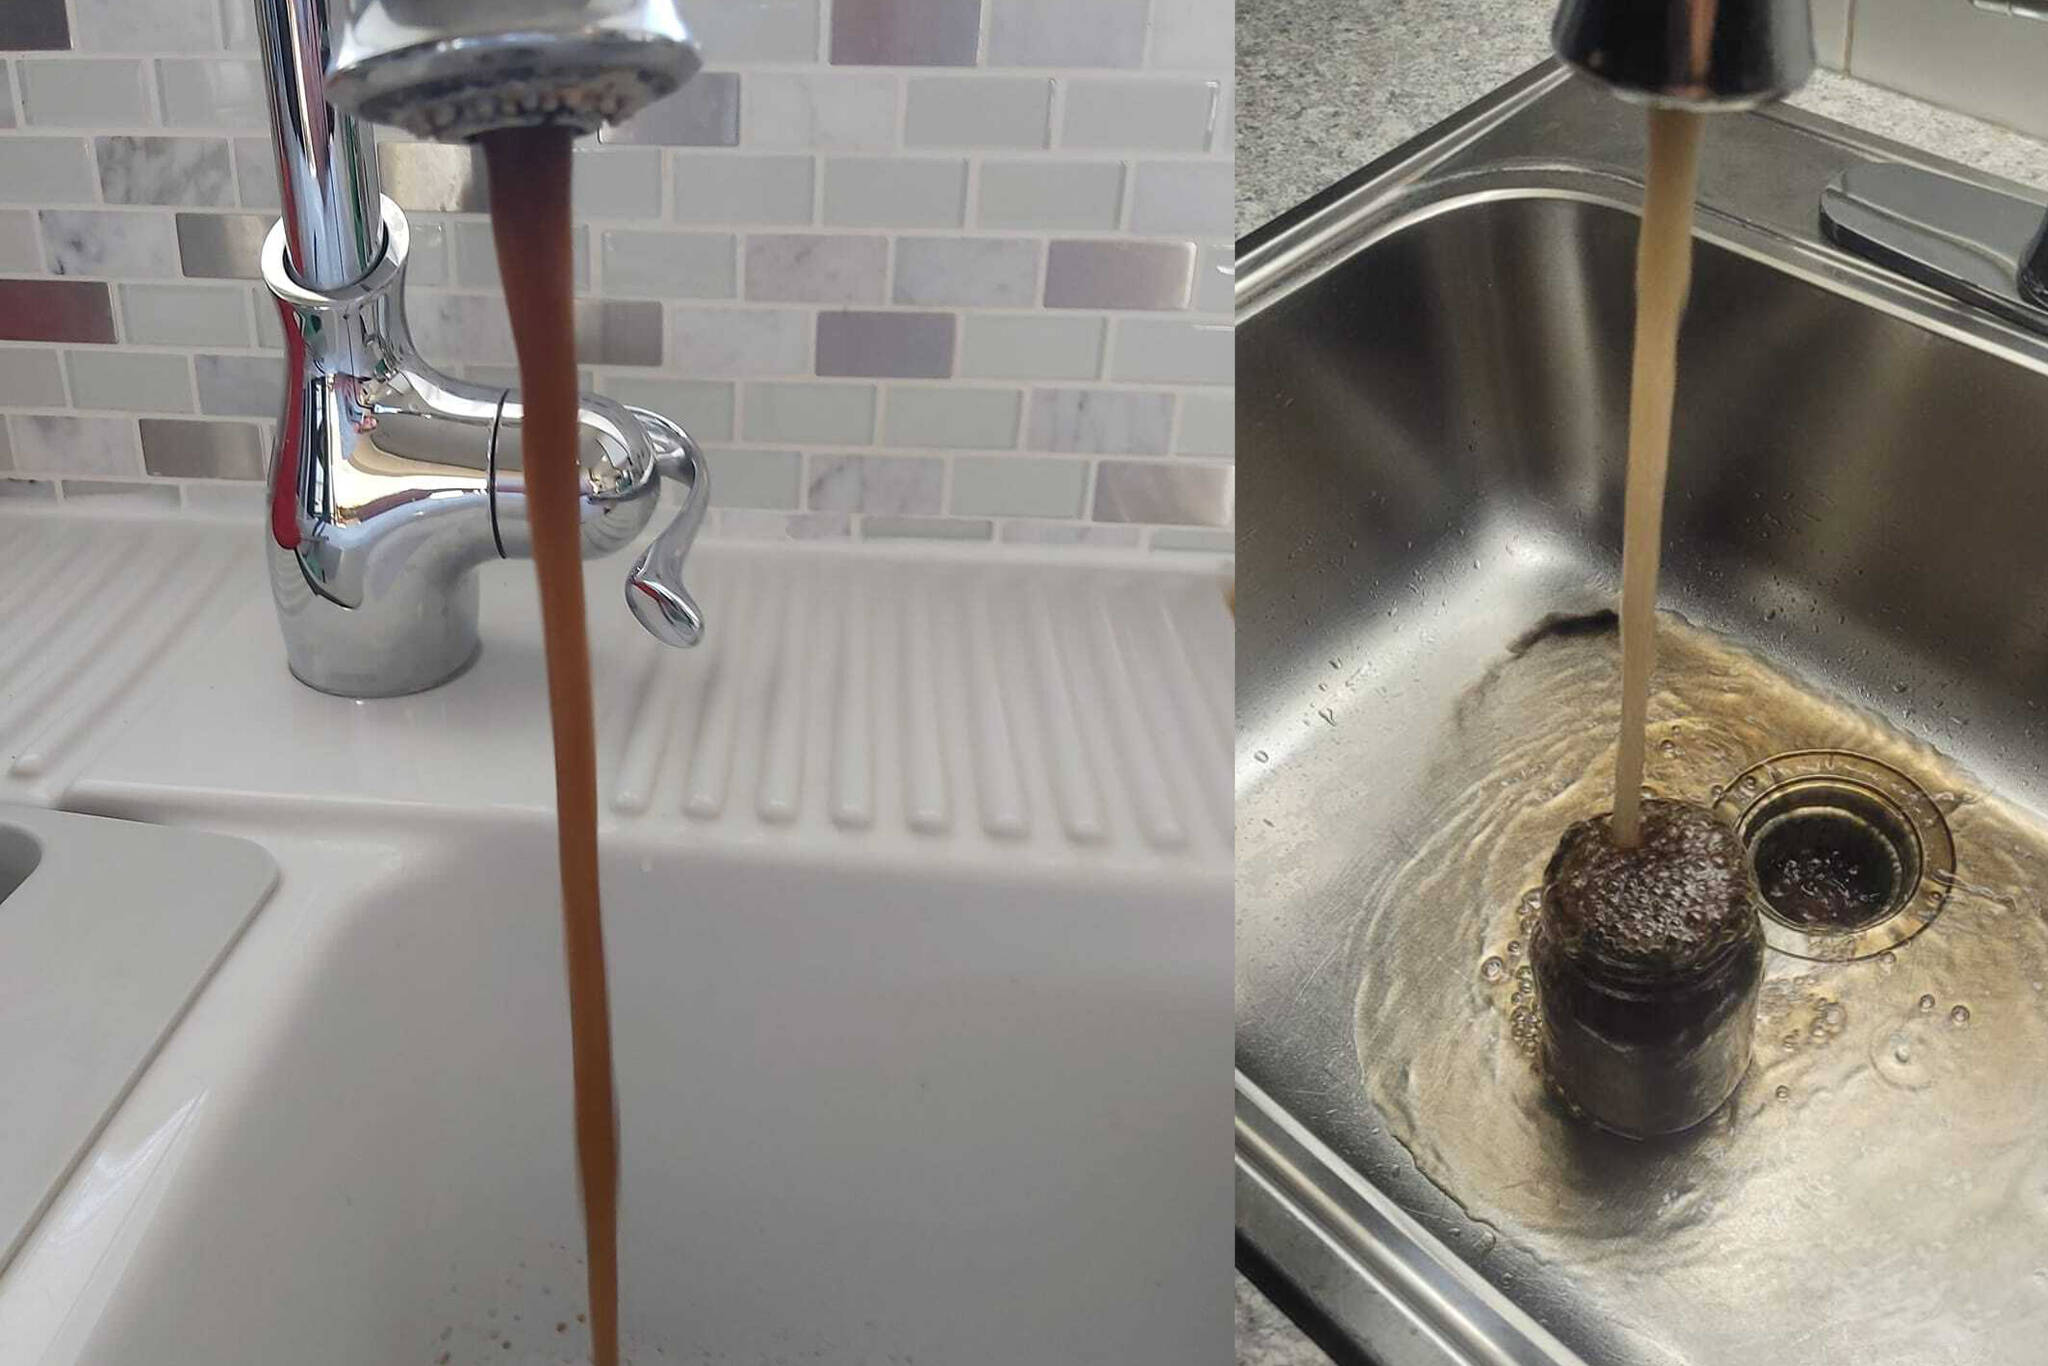 Residents in Osoyoos are being warned to boil their water before drinking. Some residents didn't need that warning as they took to social media to share images of their brown water. (Facebook)